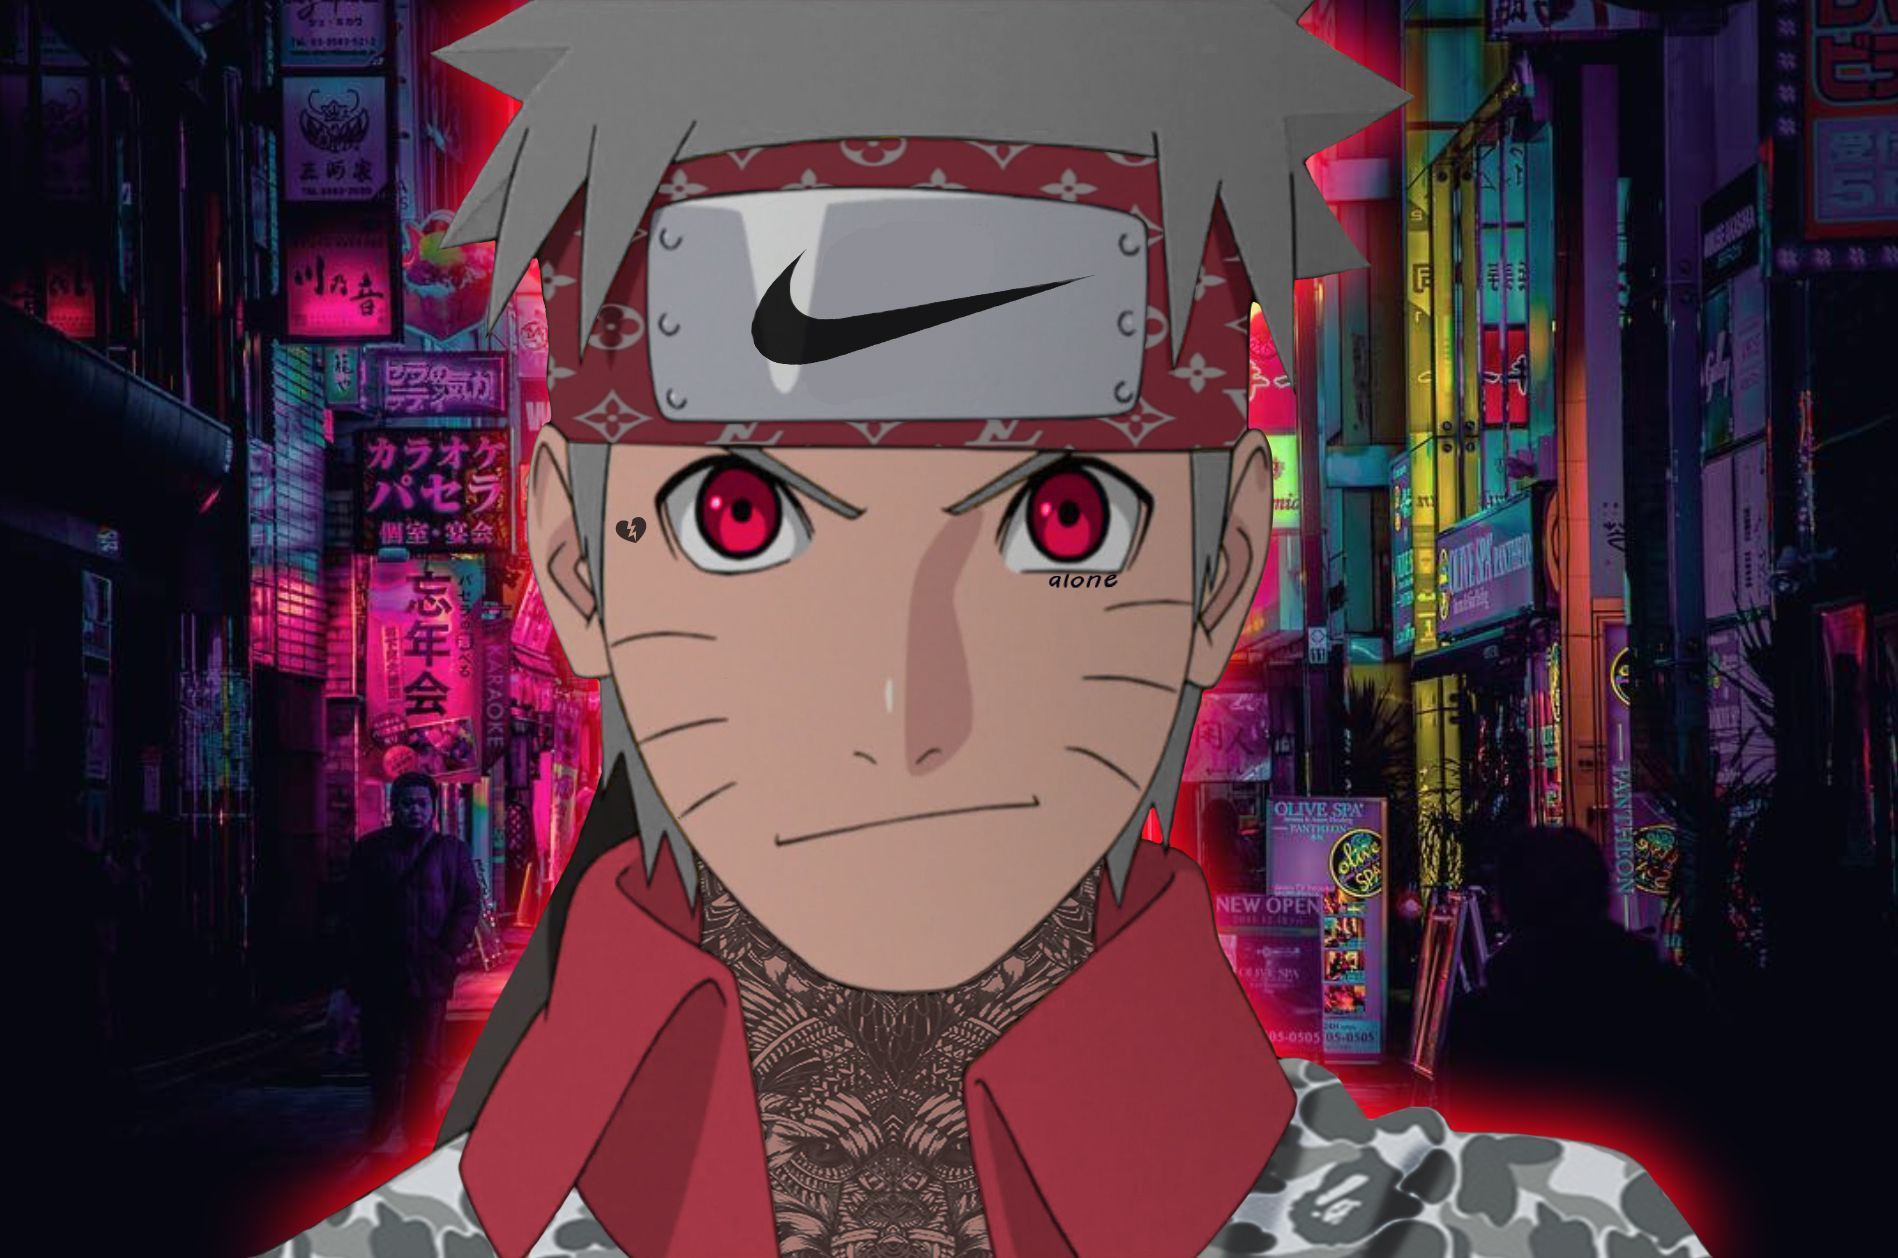 Naruto Nike Wallpapers Wallpaper Cave Feel free to use these naruto supreme nike images as a background for your pc, laptop, android phone, iphone or tablet. naruto nike wallpapers wallpaper cave